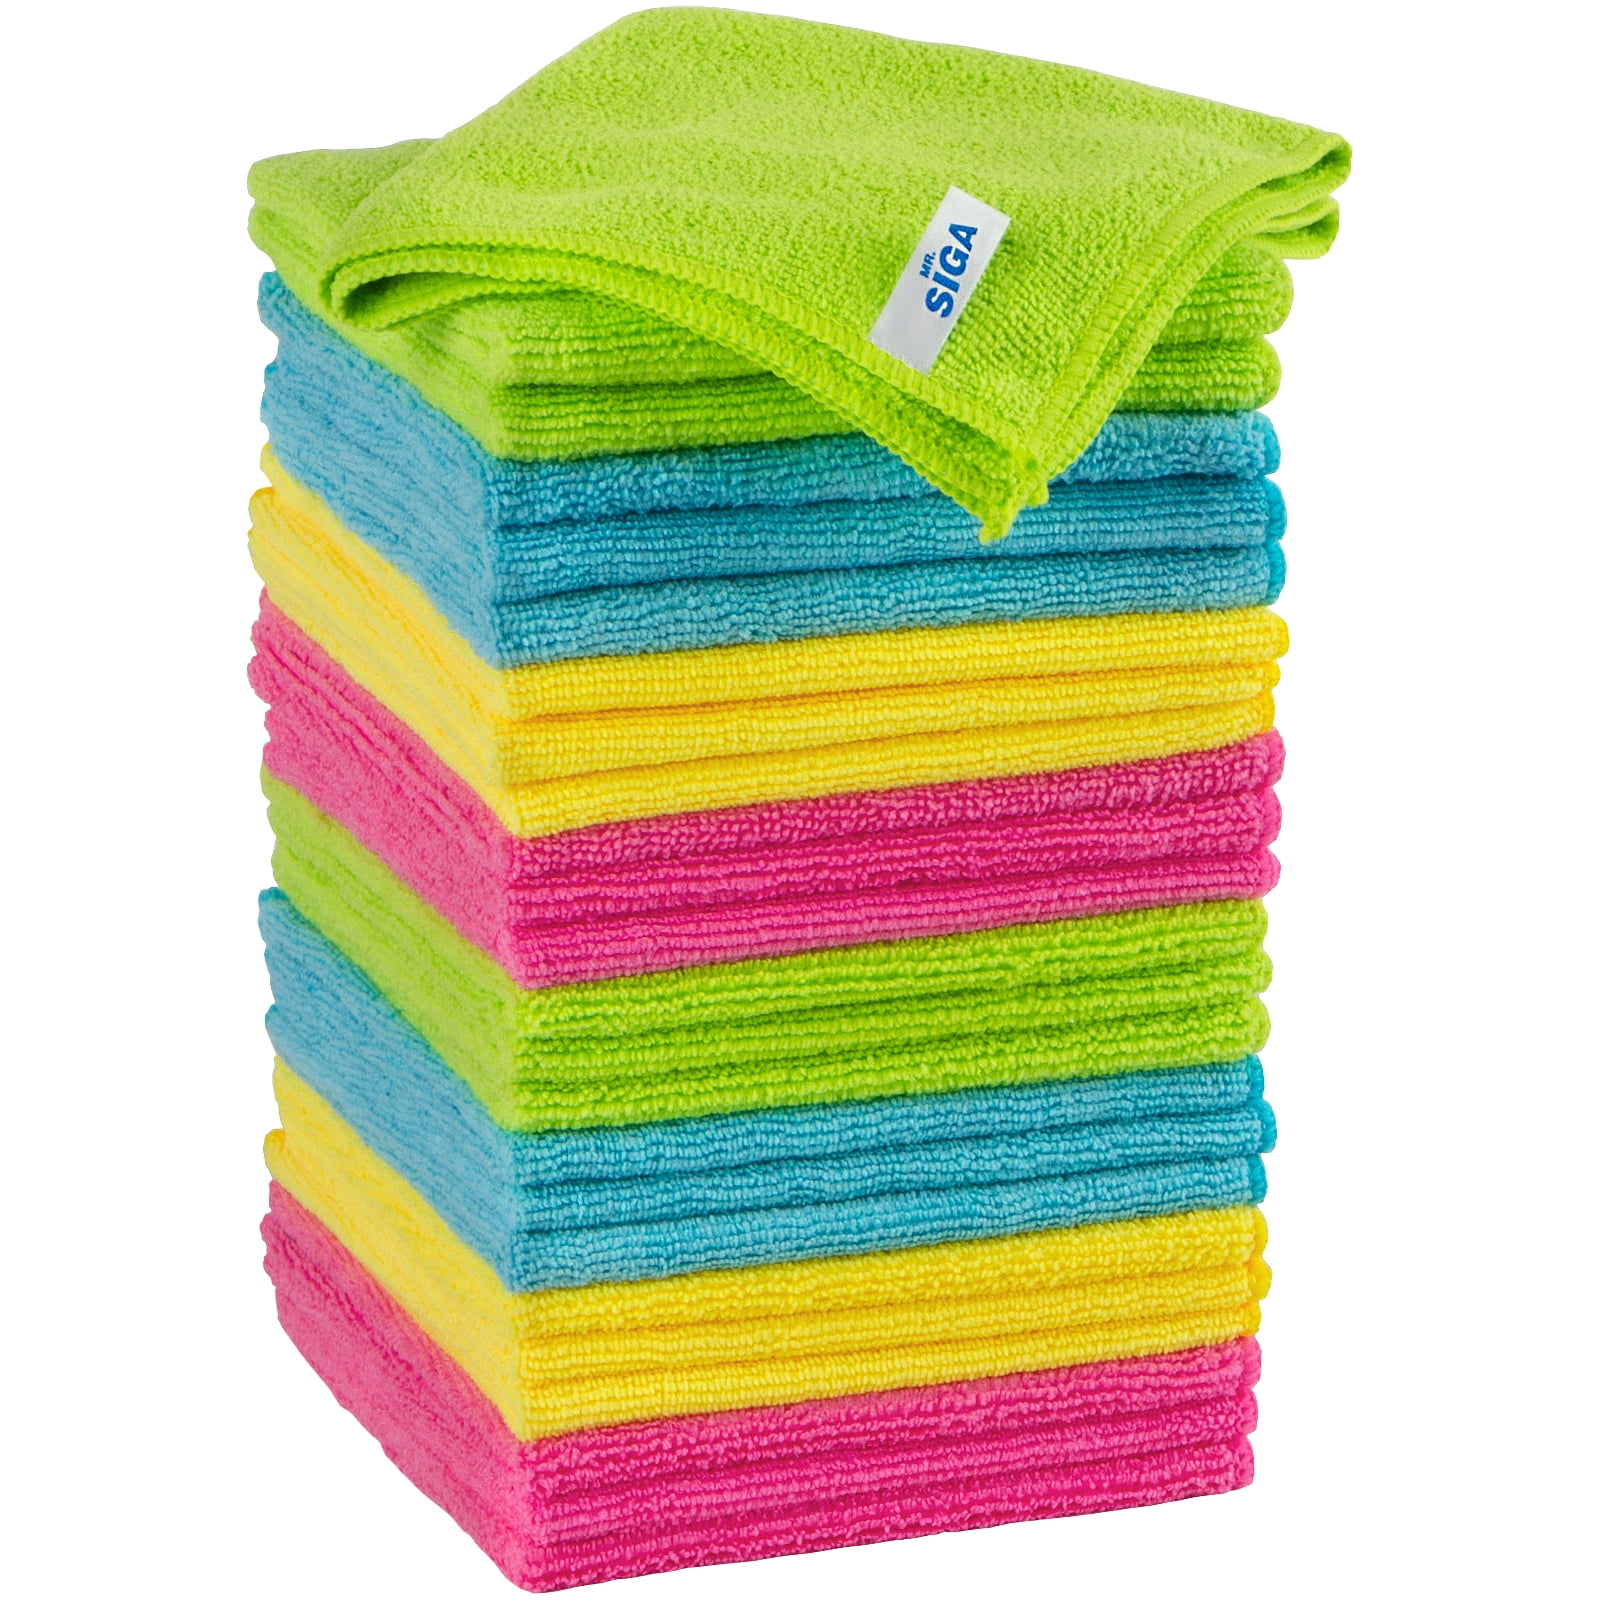 MR.SIGA SJ21632 Microfiber Cleaning Cloth 12 Pack for sale online 